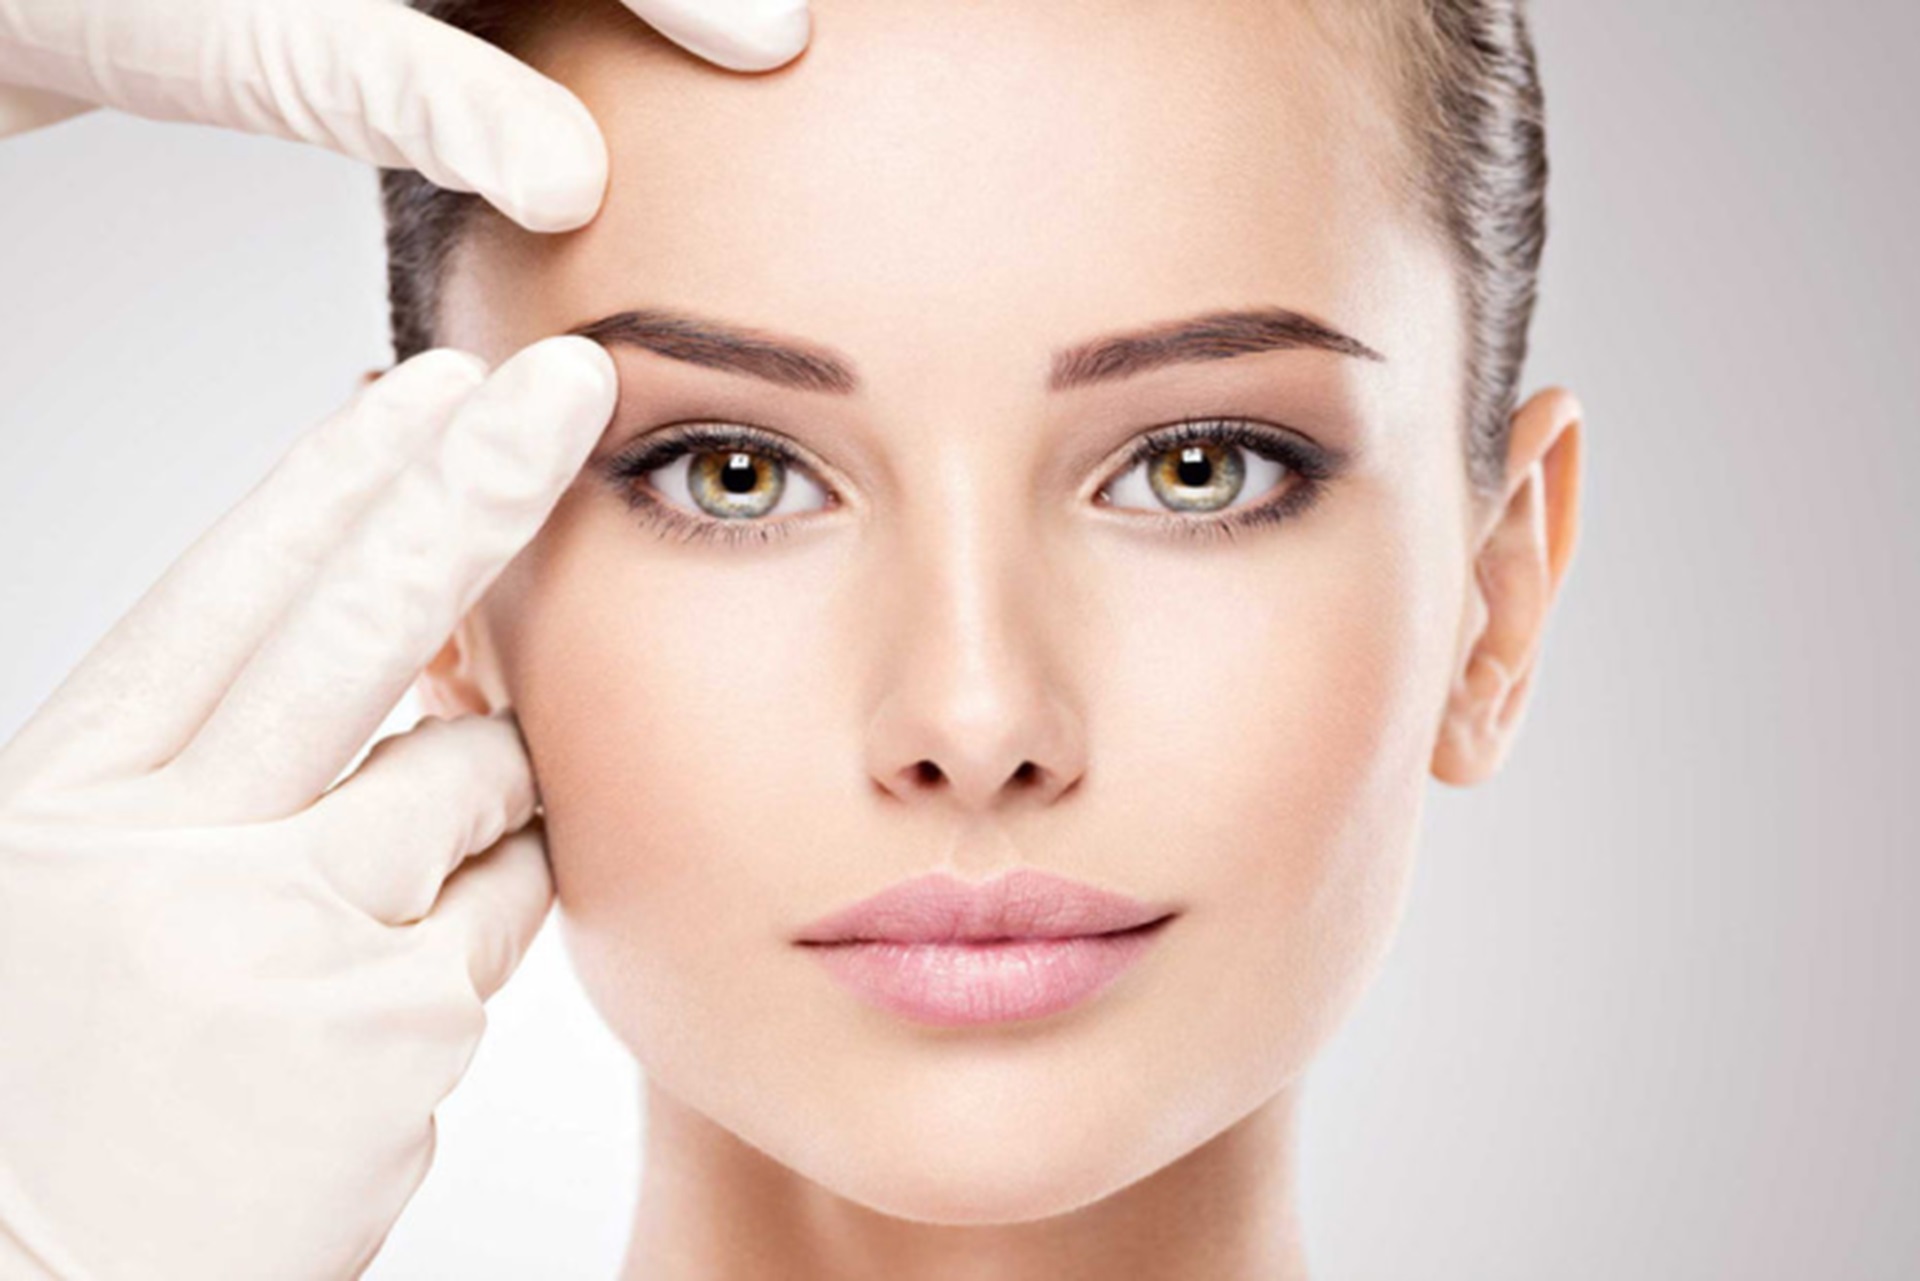 Type of Blepharoplasty surgery, in aberdeen, Uk by Dr. Jamil Ahmed